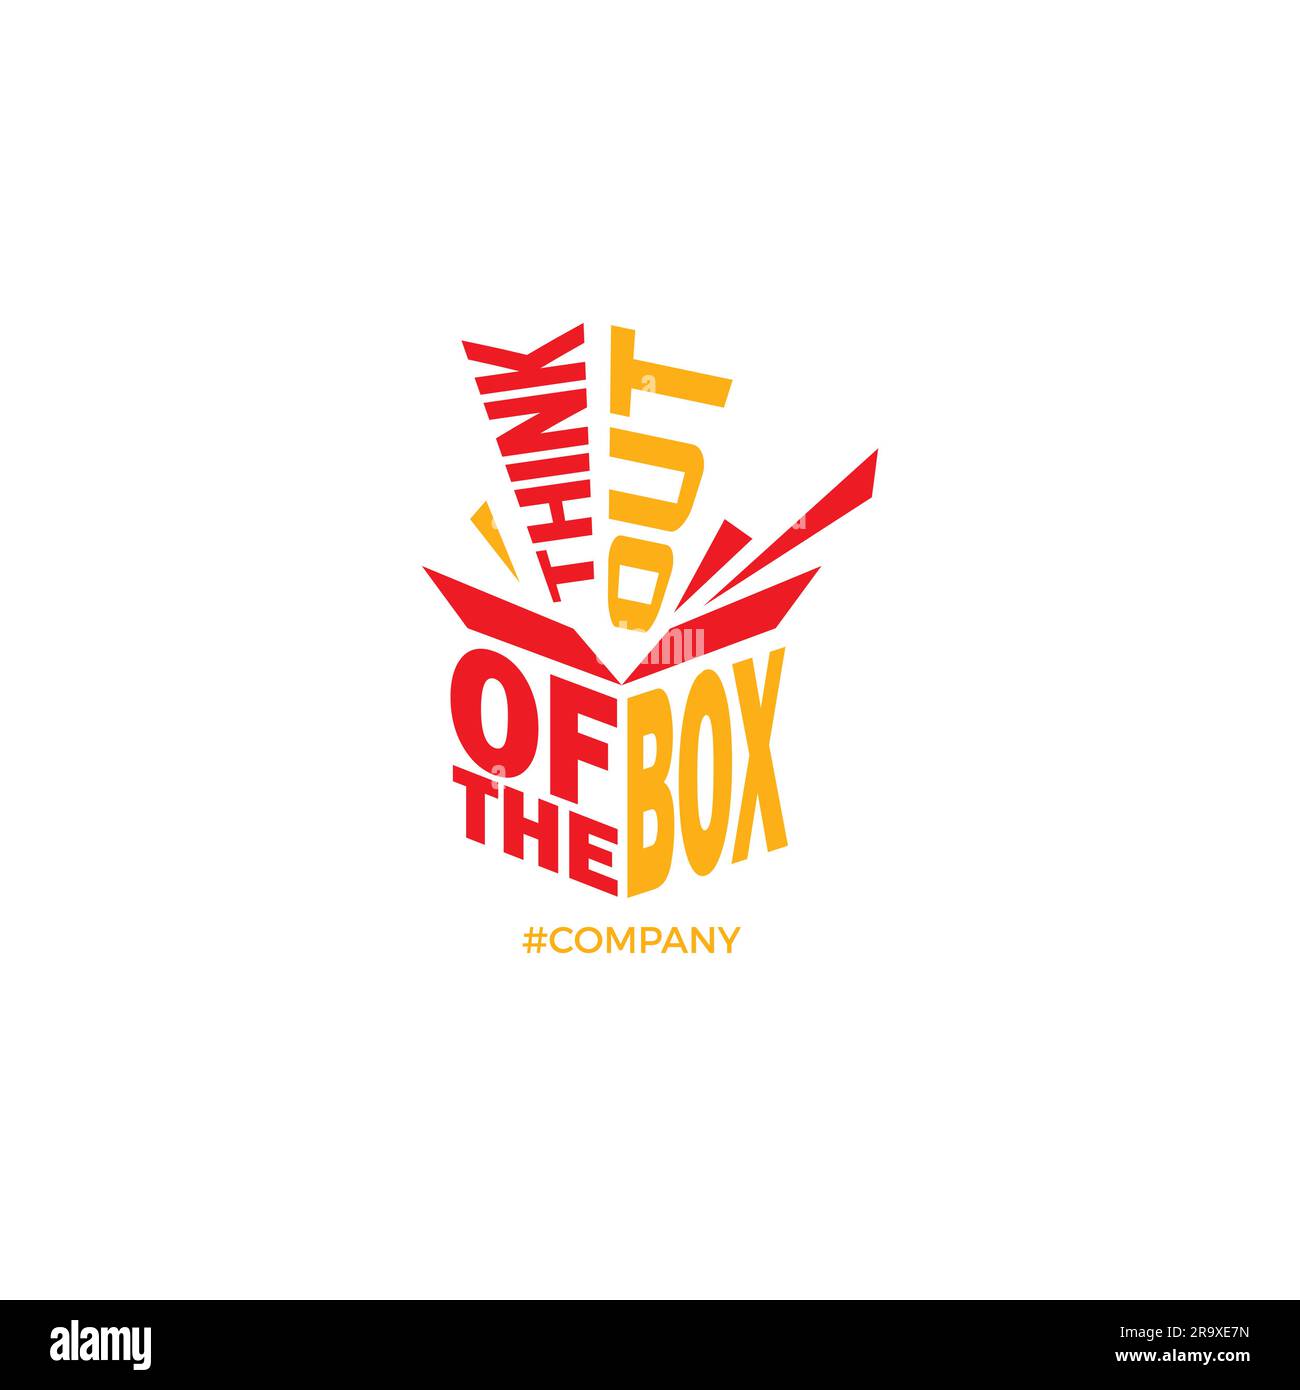 Think Out Of The Box Vector. Box logo Stock Vector